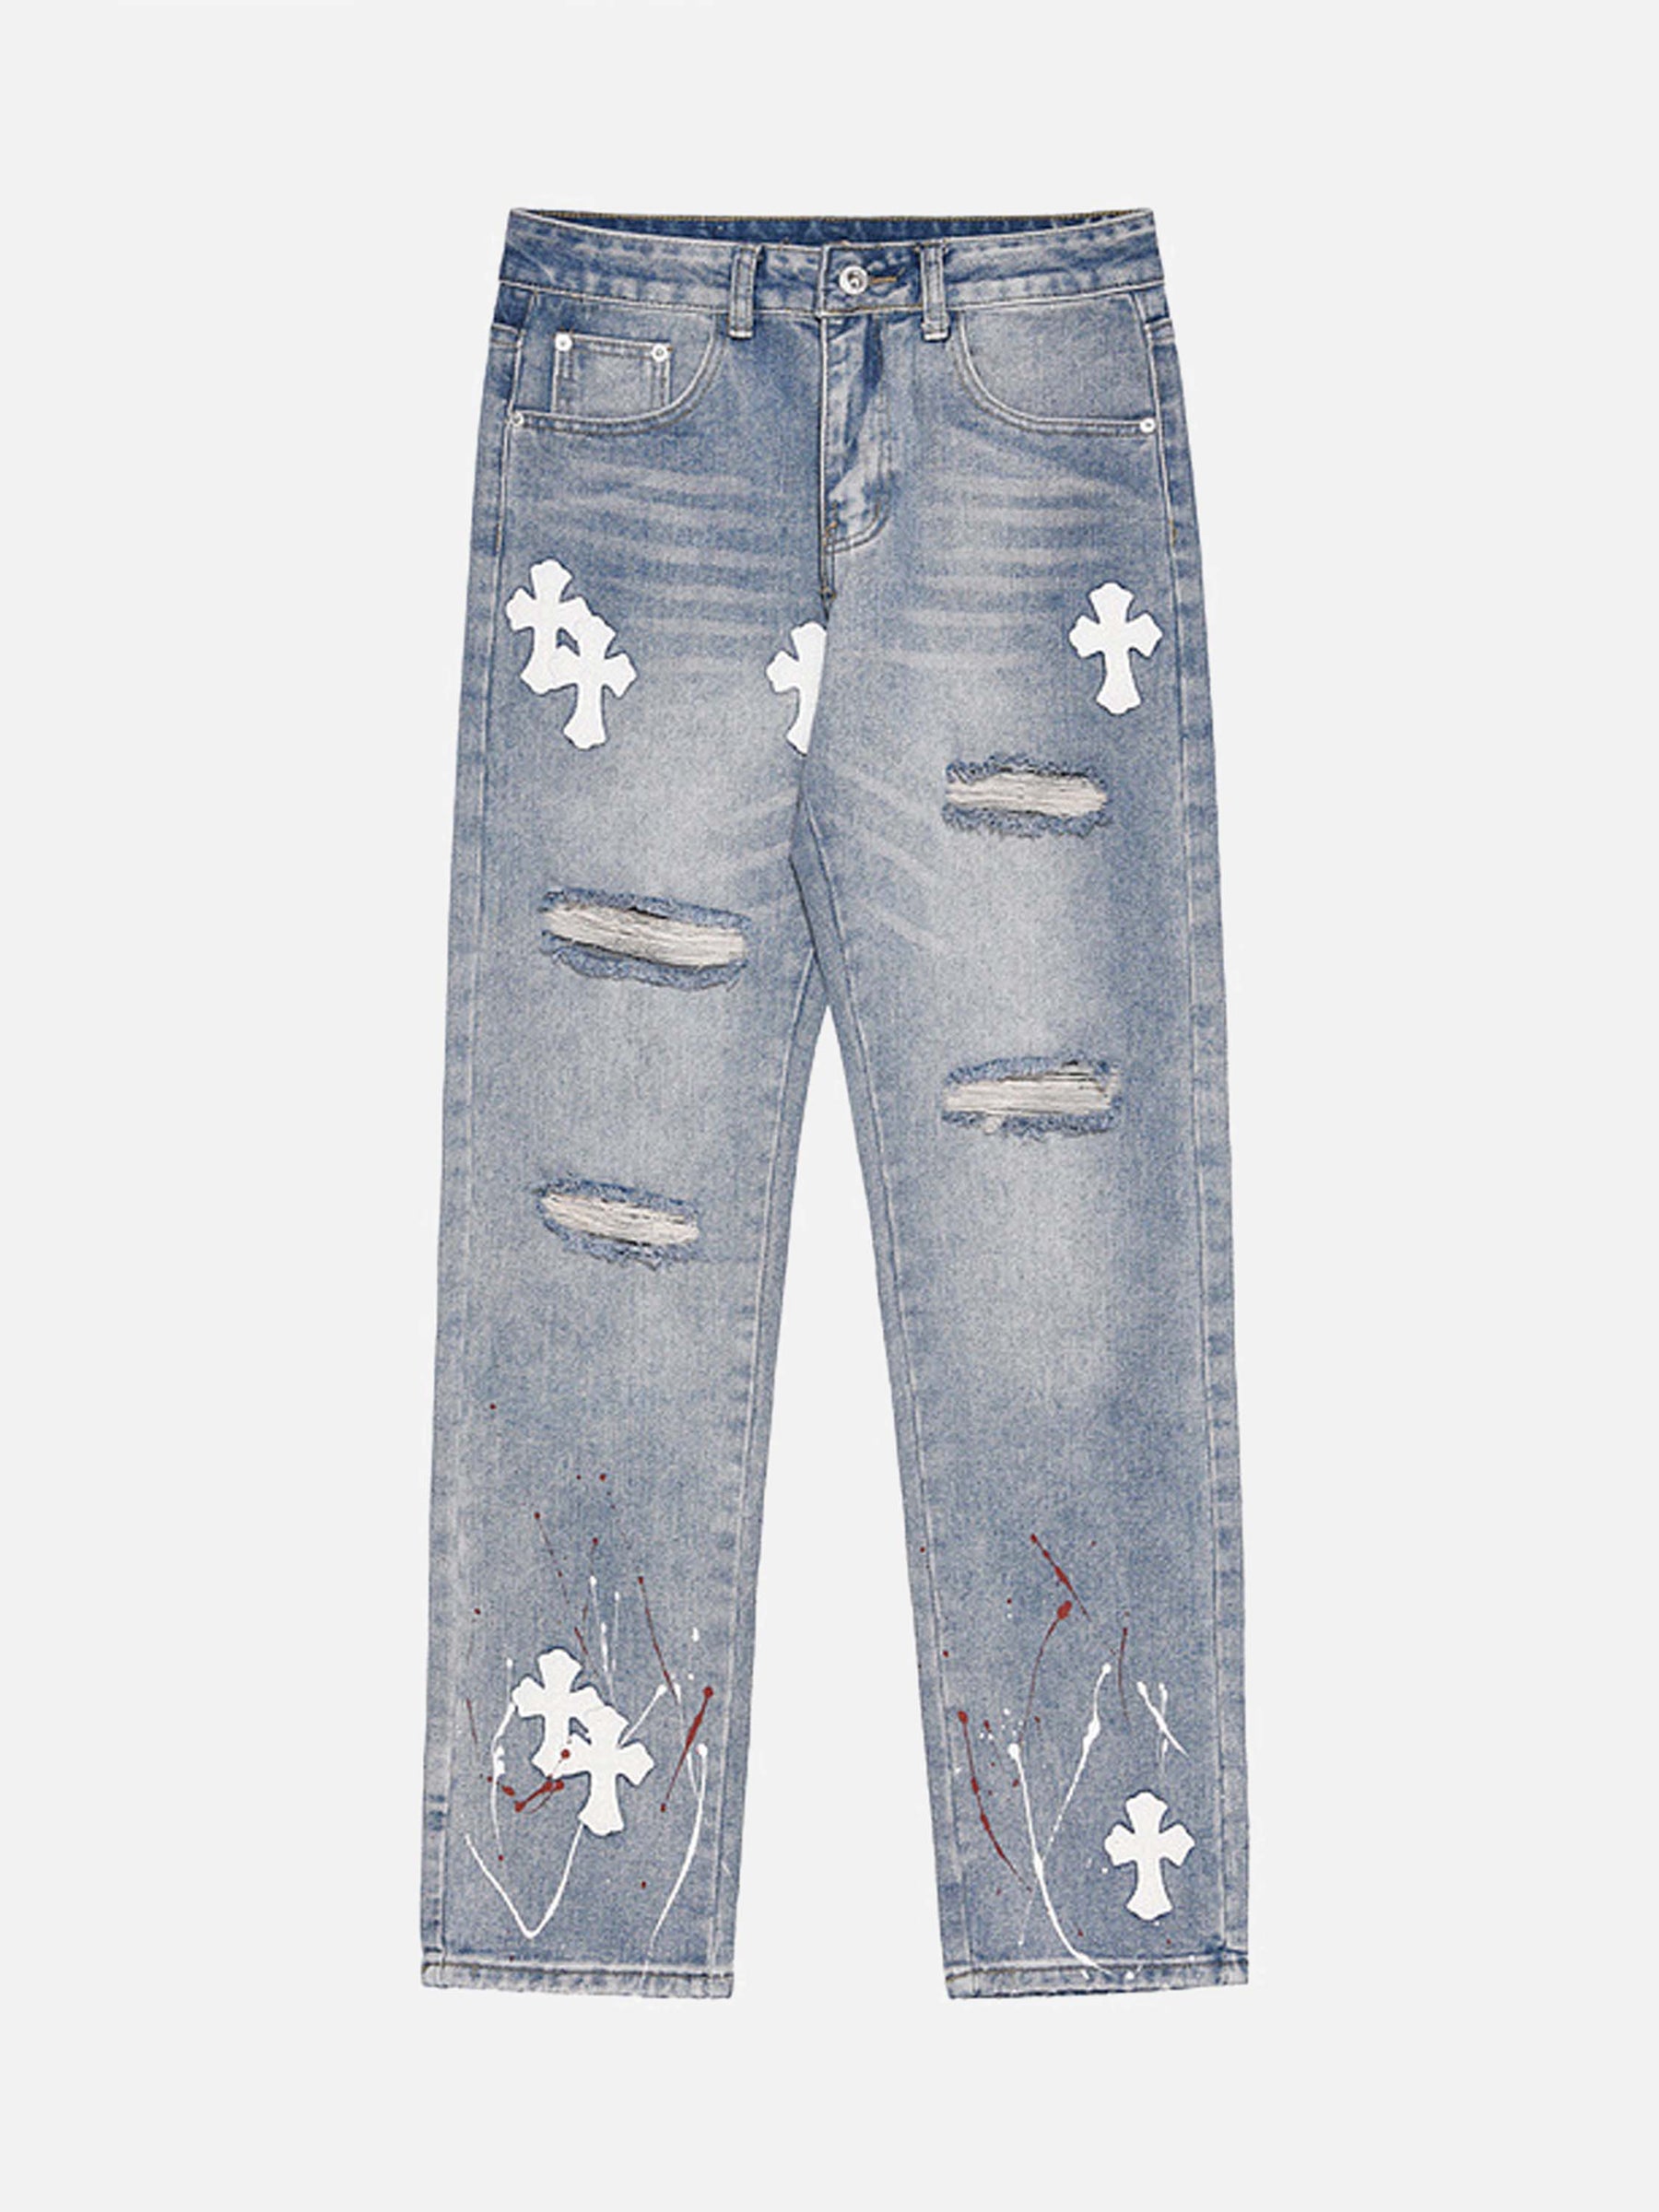 LUXENFY™ - High Street Cross Hole Splash Ink Straight Loose-fitting Jeans-1476 luxenfy.com